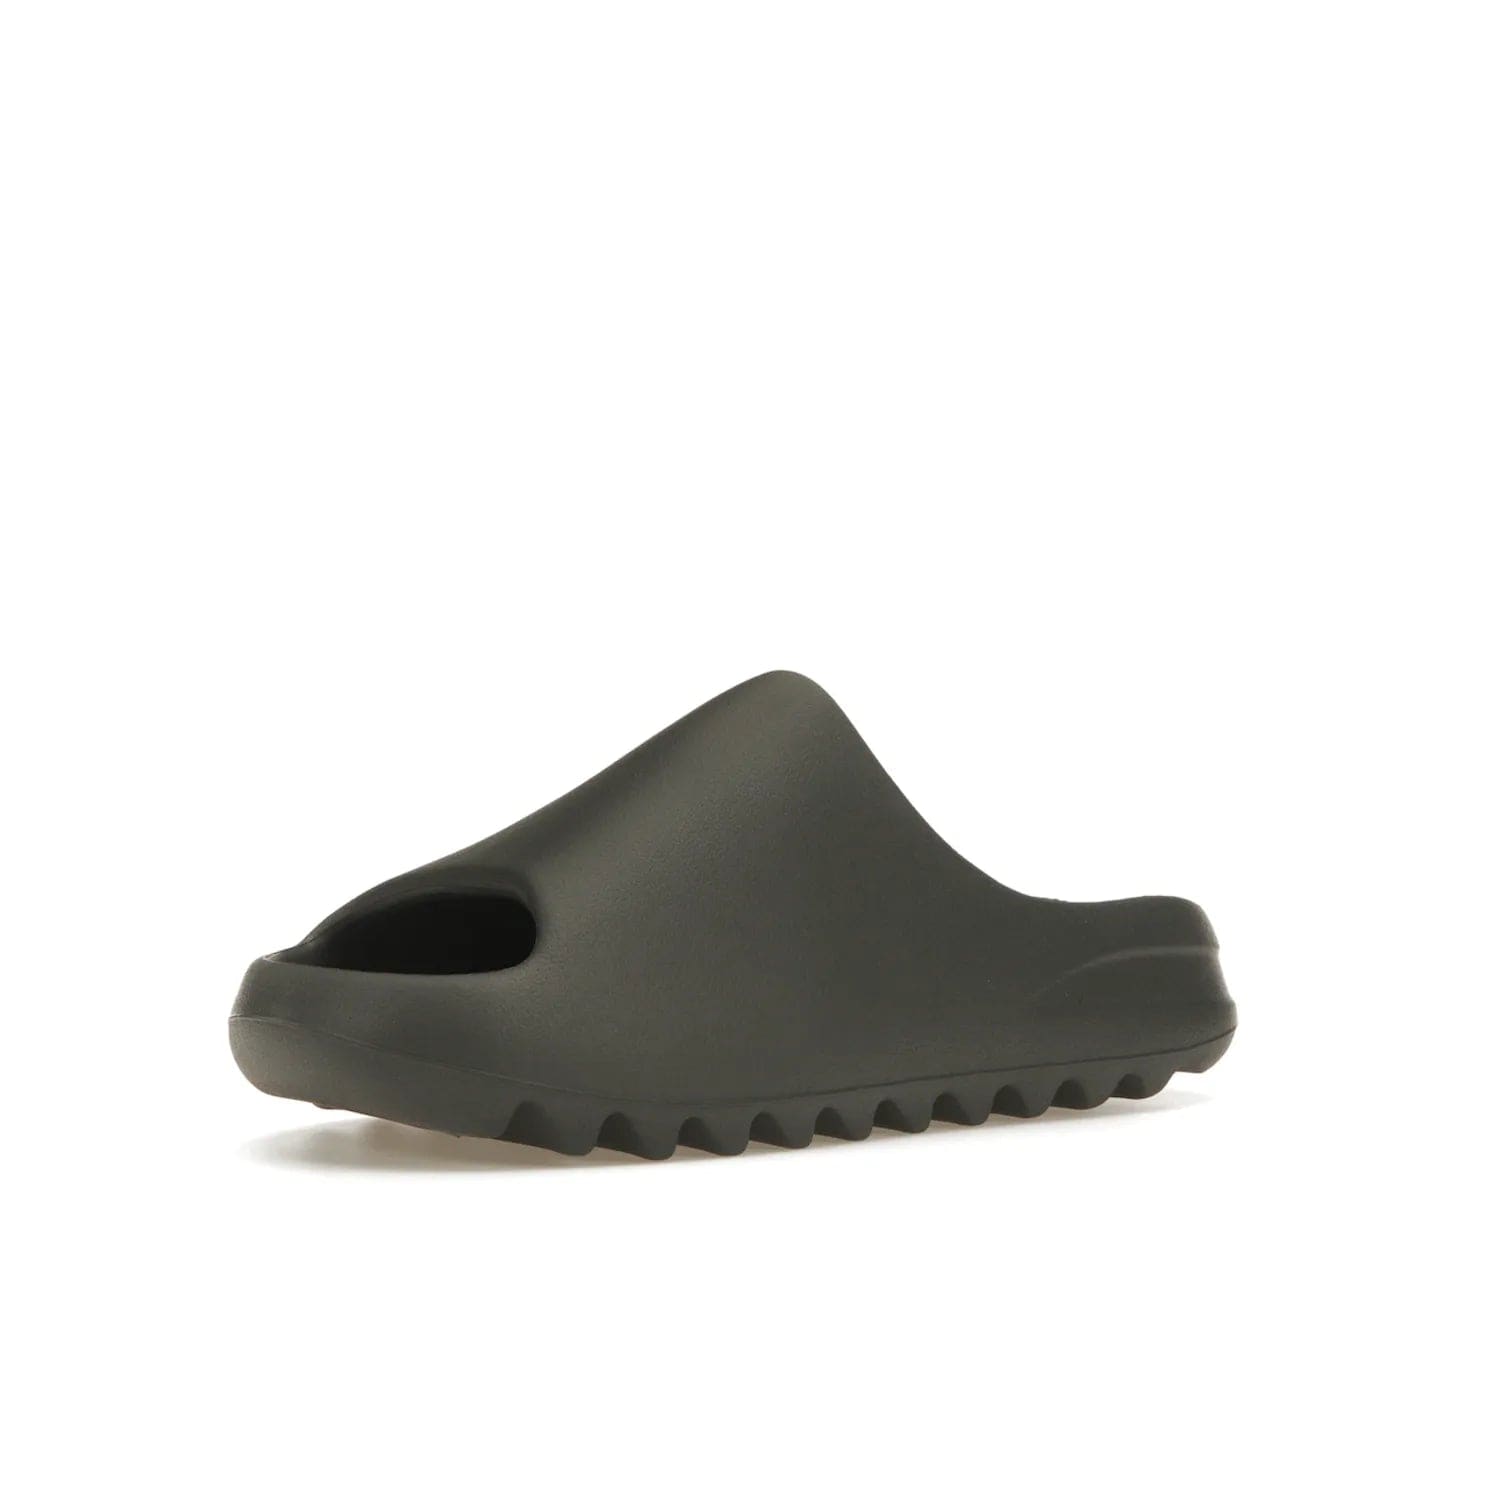 adidas Yeezy Slide Granite - Image 15 - Only at www.BallersClubKickz.com - Introducing the adidas Yeezy Slide Granite with a sleek, soft-to-touch one-piece upper – perfect for making a statement with its minimalistic design and luxurious comfort. Get yours now for only $70.